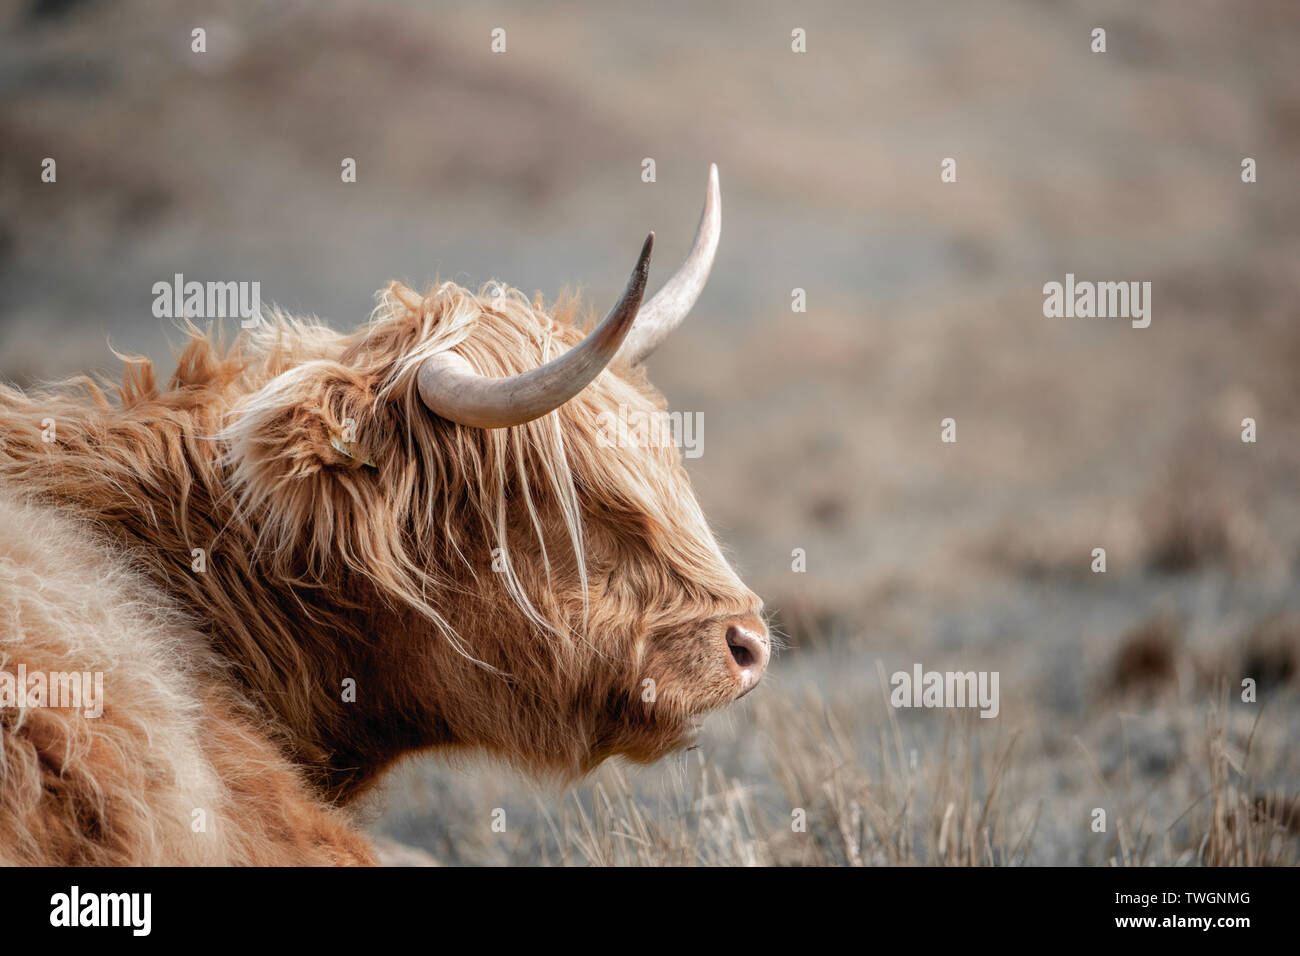 Shaggy, Ecosse Highland cattle Banque D'Images